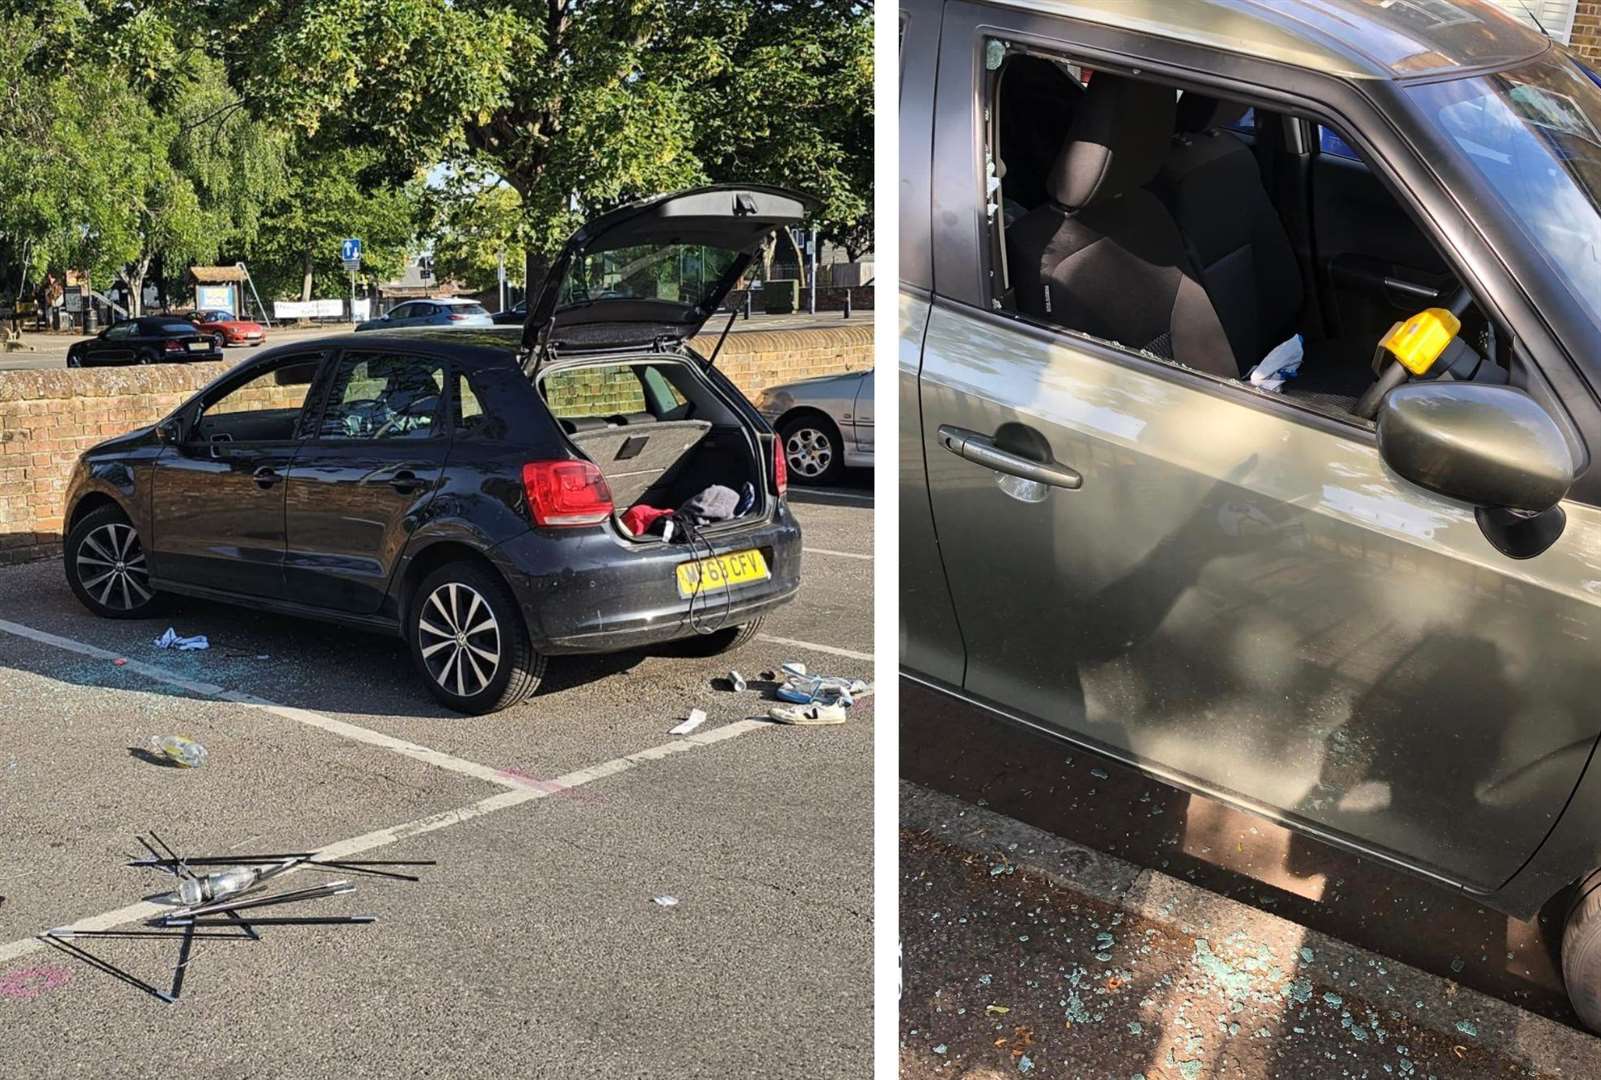 Eight cars were vandalised in an overnight rampage in Faversham